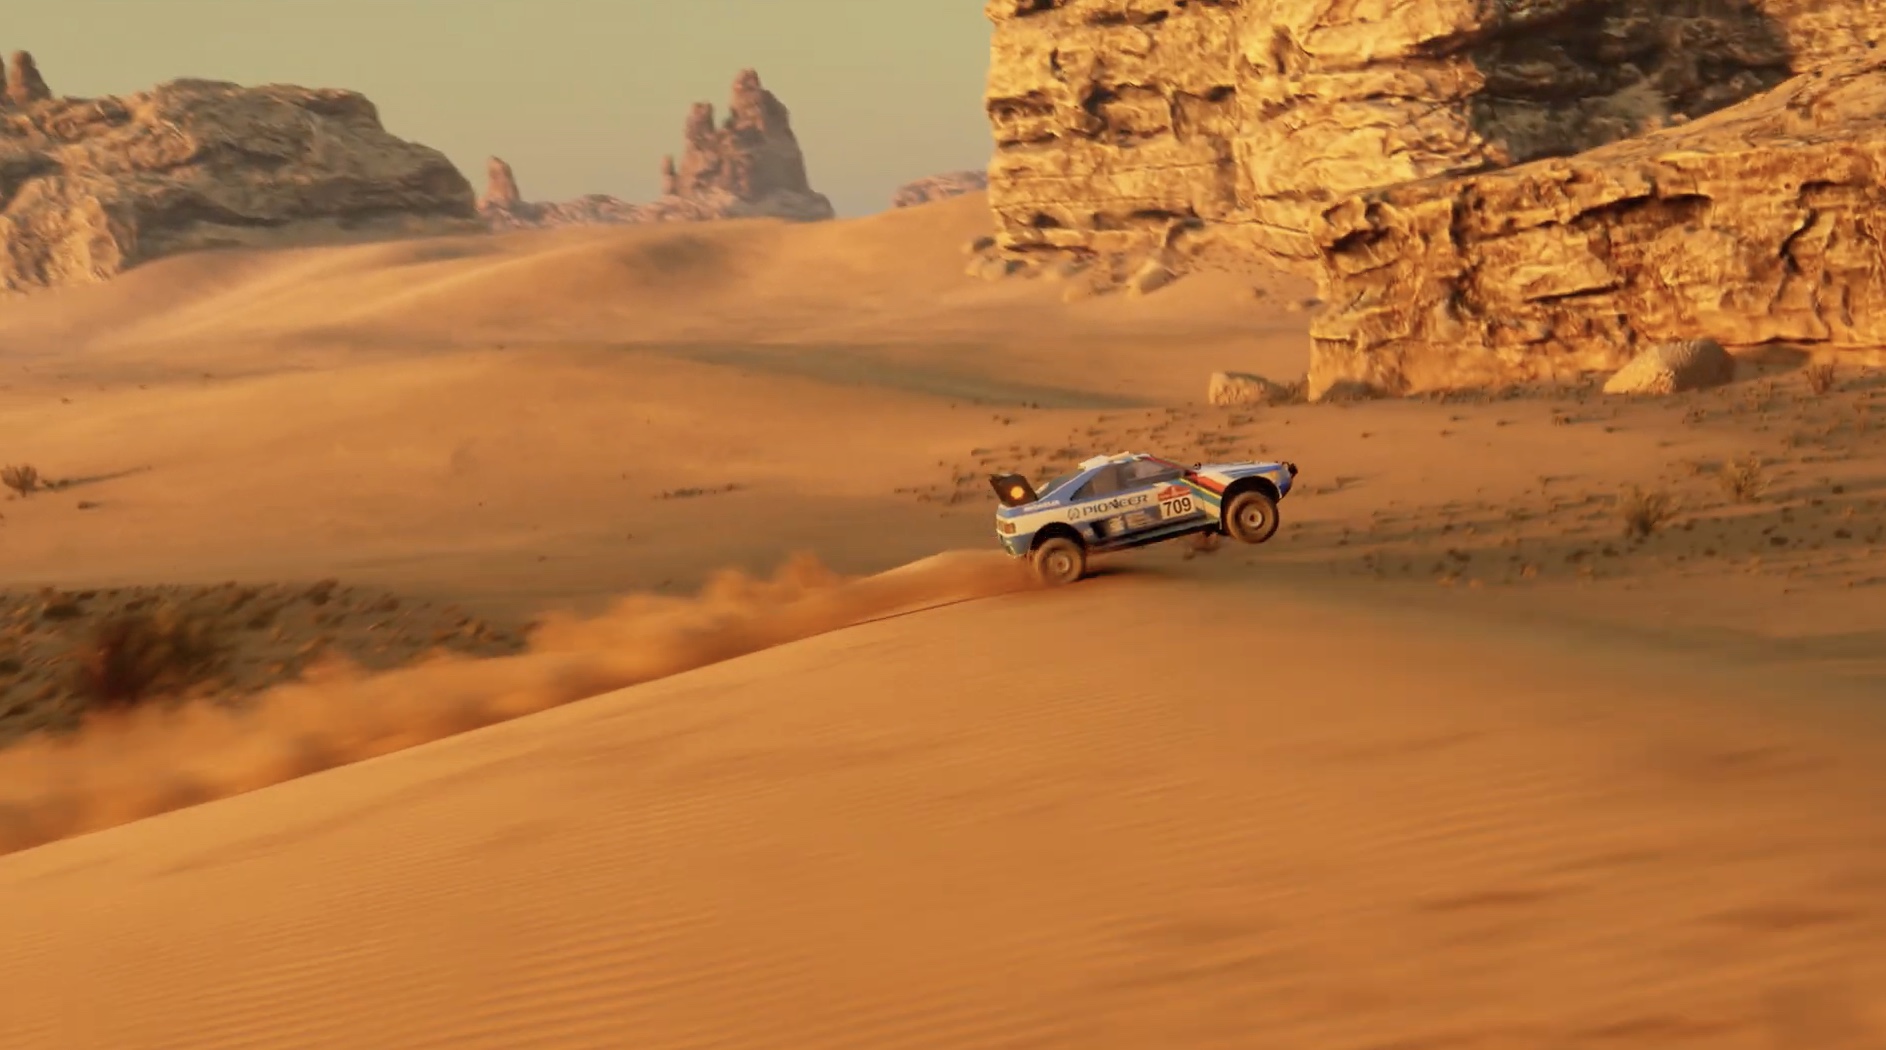 Dakar Desert Rally | Download and Buy Today - Epic Games Store